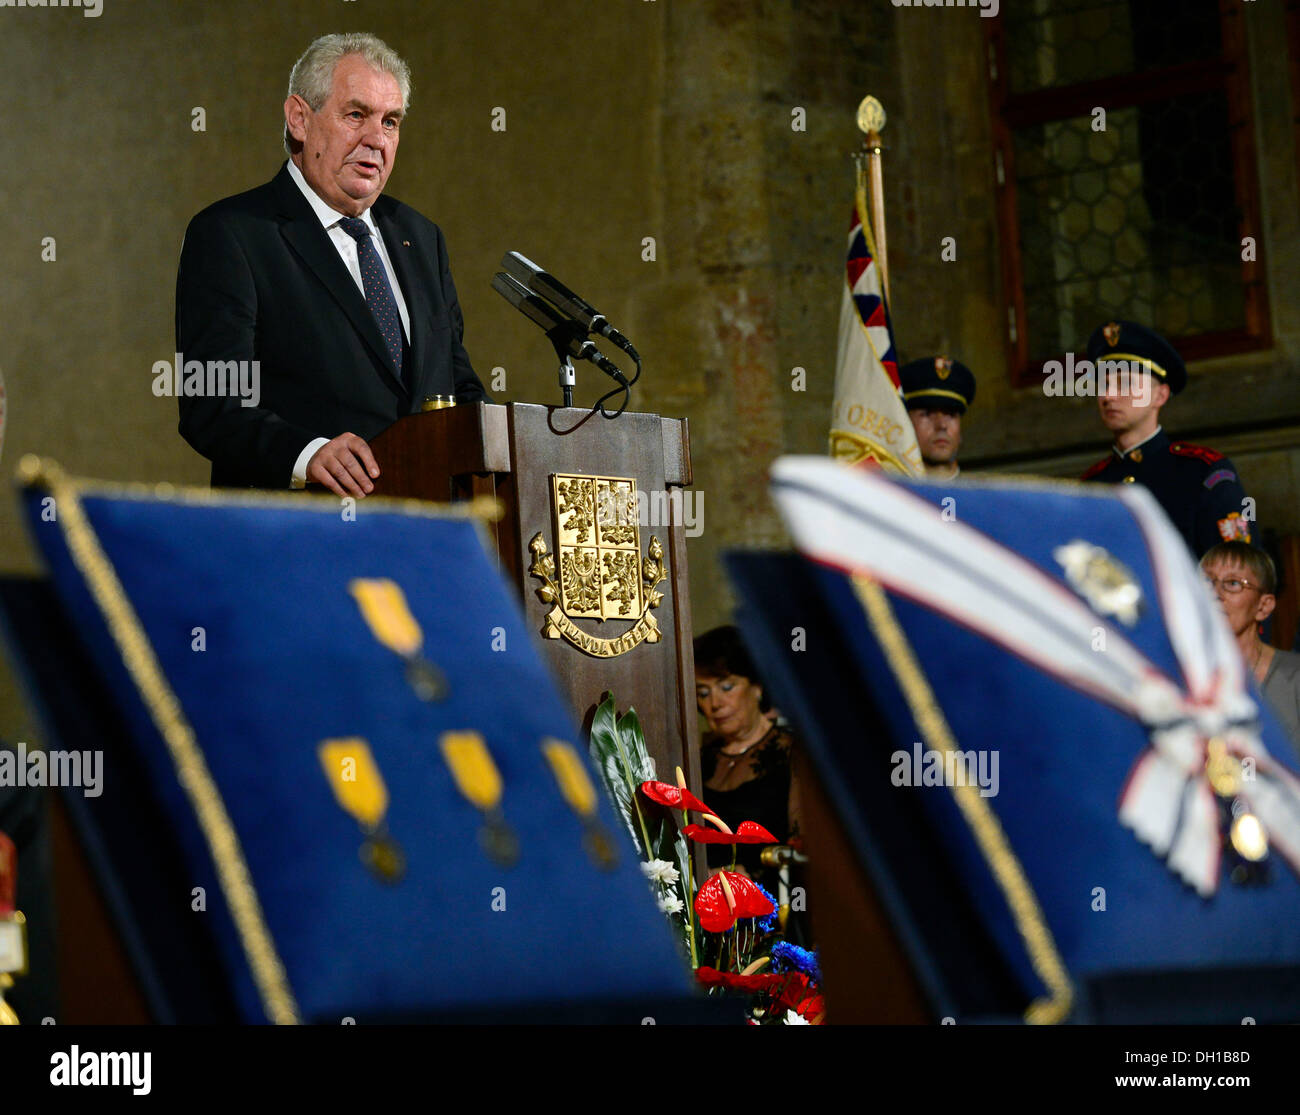 Prague, Czech Republic. 28th Oct, 2013. Czech President Milos Zeman awarded 29 selected personalities on the 95th anniversary of establishment of Independent Czechoslovakia today and said he does not comprehend history as a competition of abstract ideas, but as a competition of specific people´s ideas. He said the path of none of the awarded was steeply rising right from the start, but that they had often to cope with injuries, mistakes or slanders. Two of the 29 awarded got the Order of Tomas Garrigue Masaryk, the rest the Medal of Merit. © CTK/Alamy Live News Stock Photo